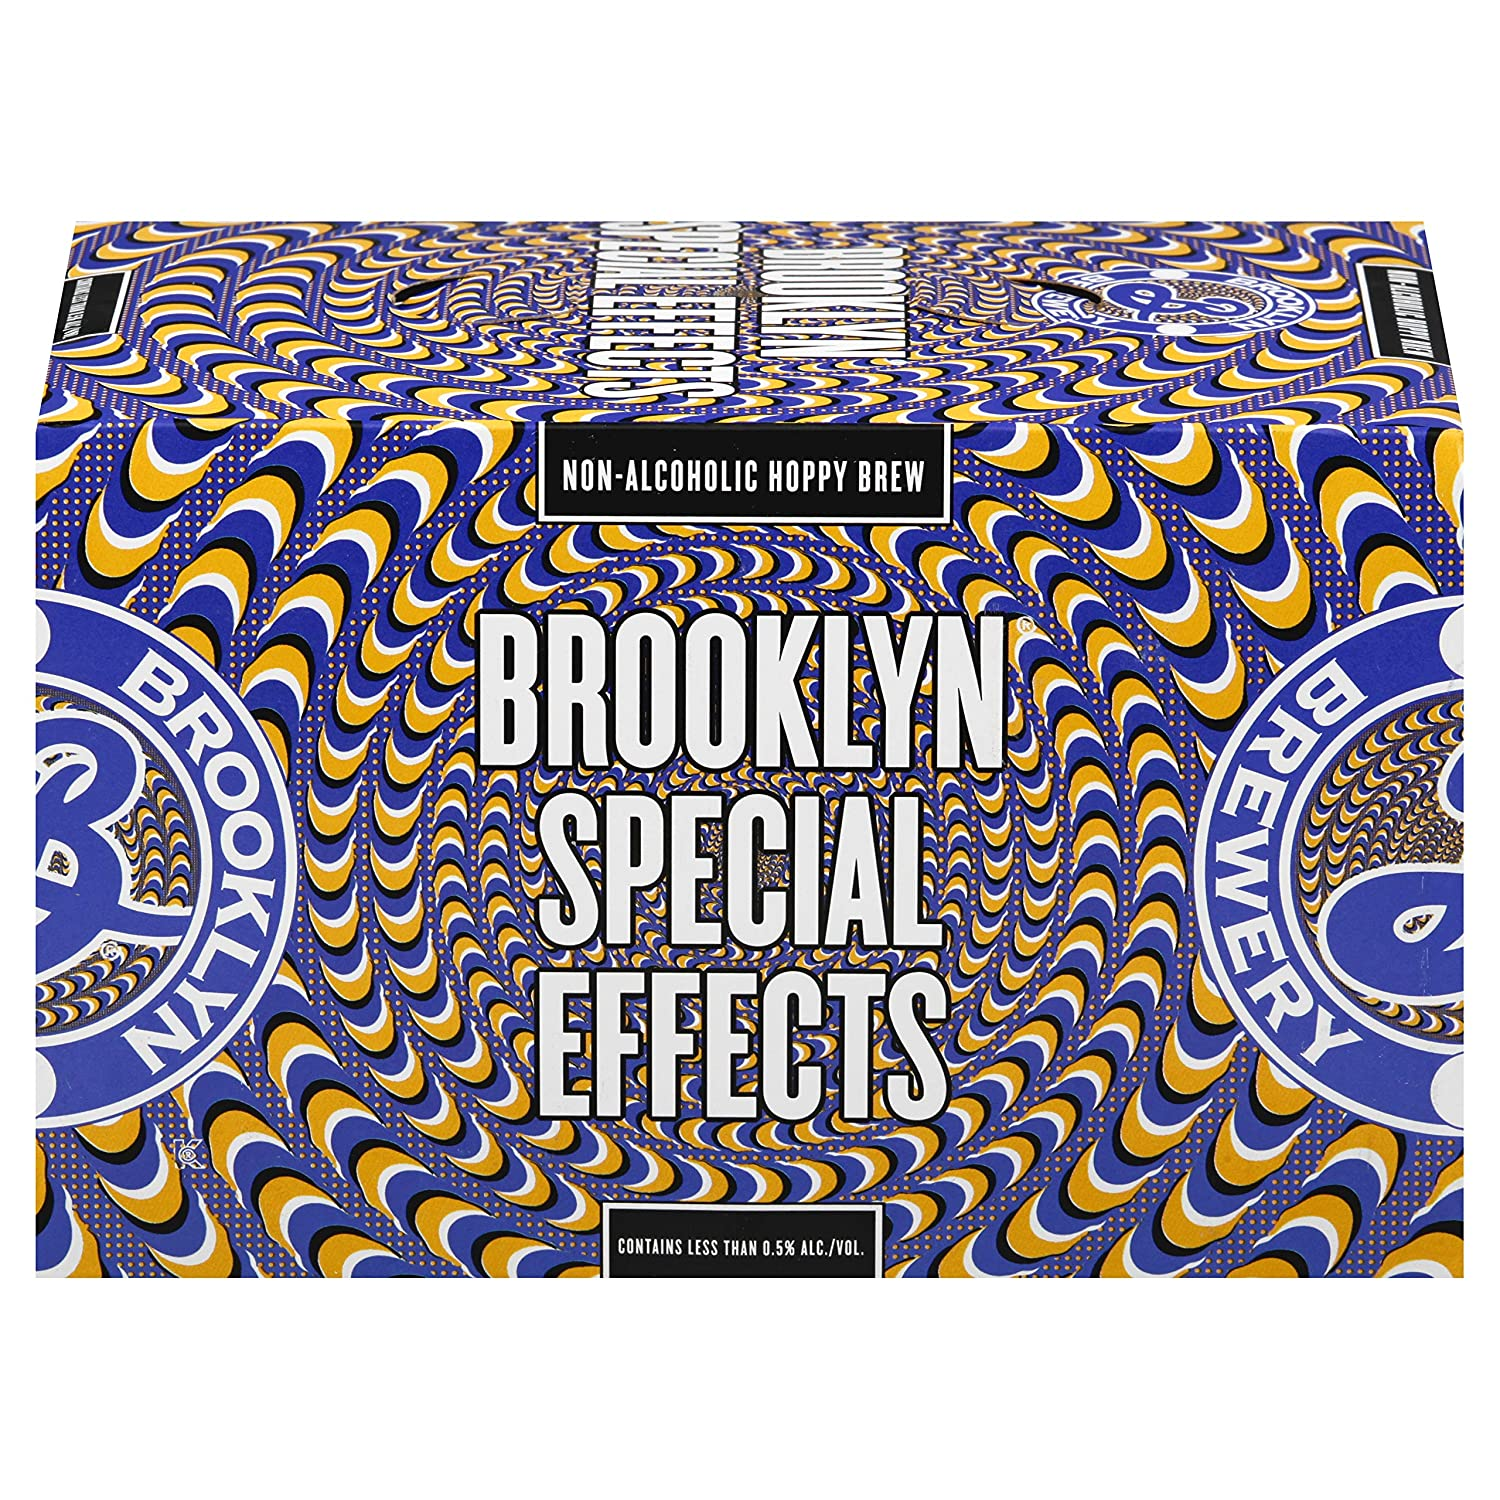 Brooklyn Special Effects Hoppy Non Alcoholic Brew, 12 Oz Cans, Pack Of 6
